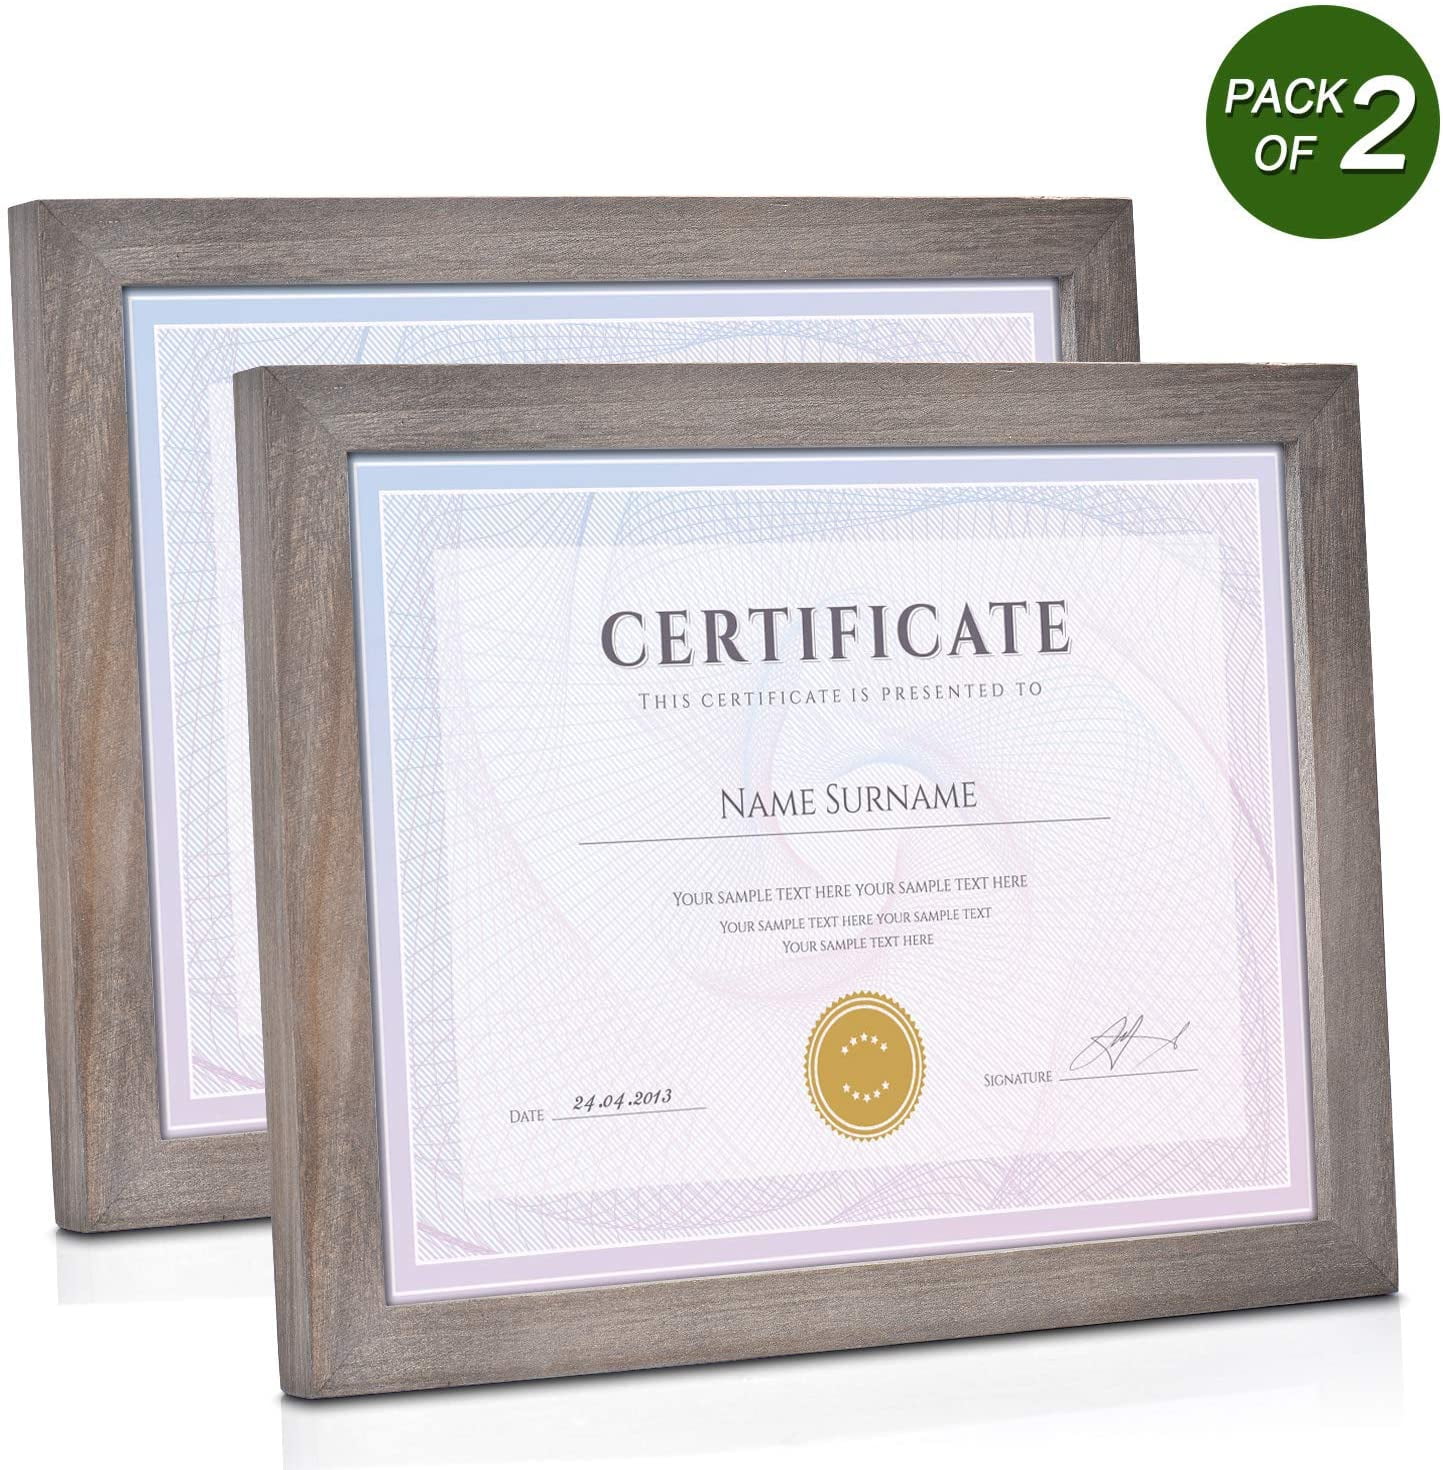 8 Pack 8.5x11 Aluminum Picture Frame for Certificate Document Photo Wall/Table 